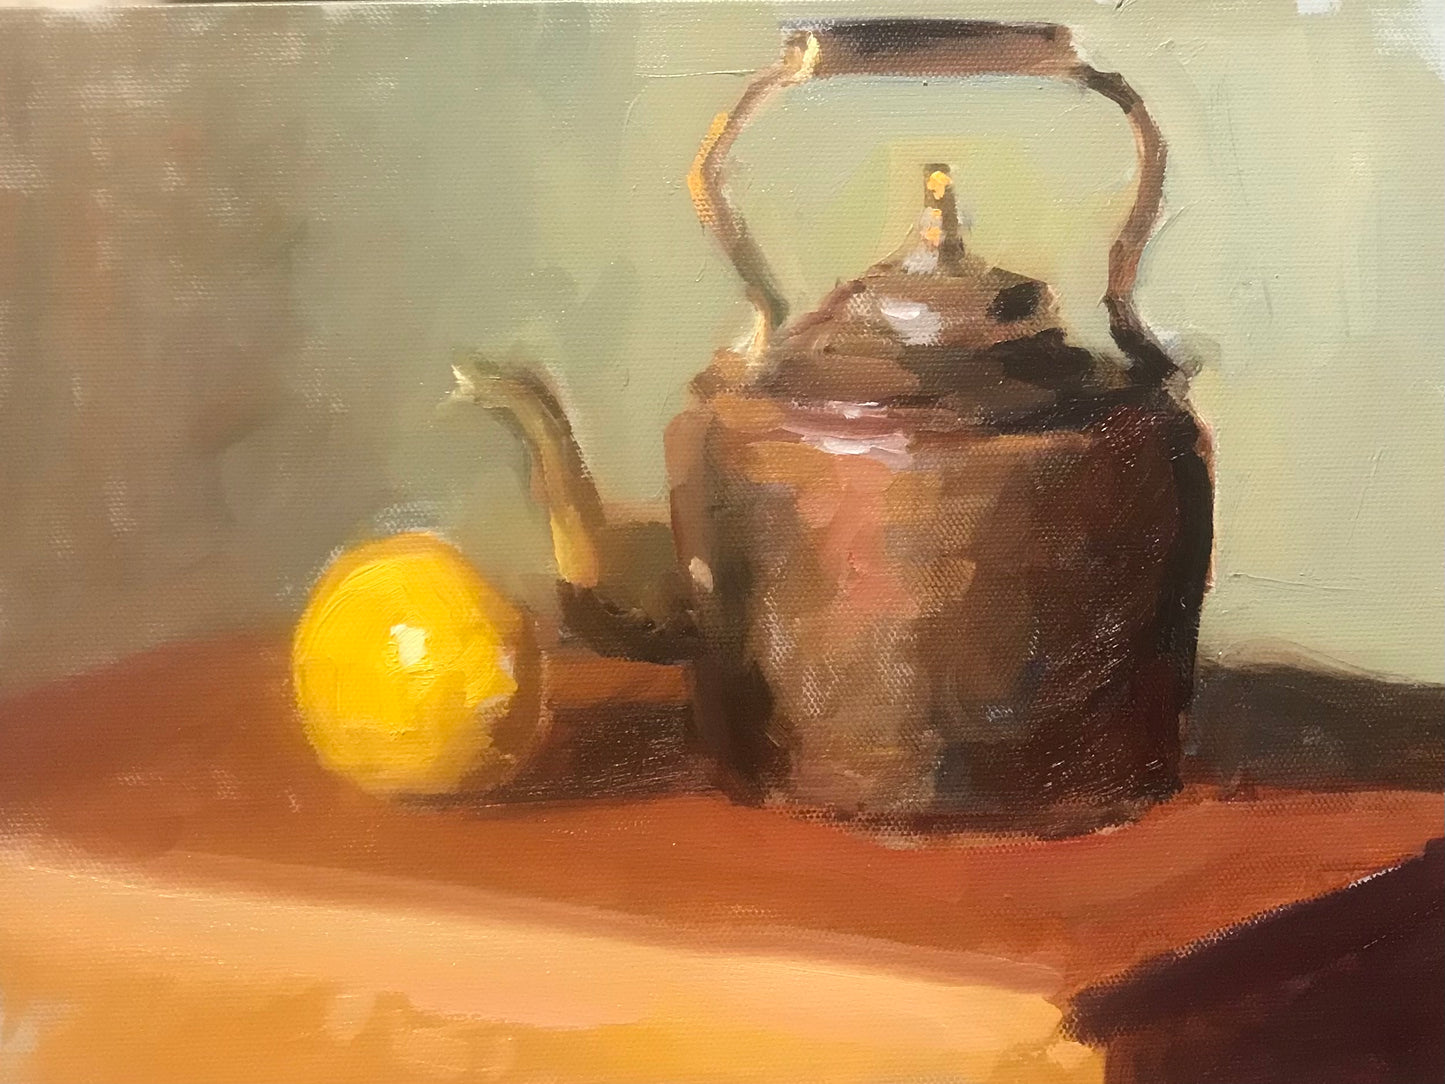 The Little Teapot (9 x 12 Inches)